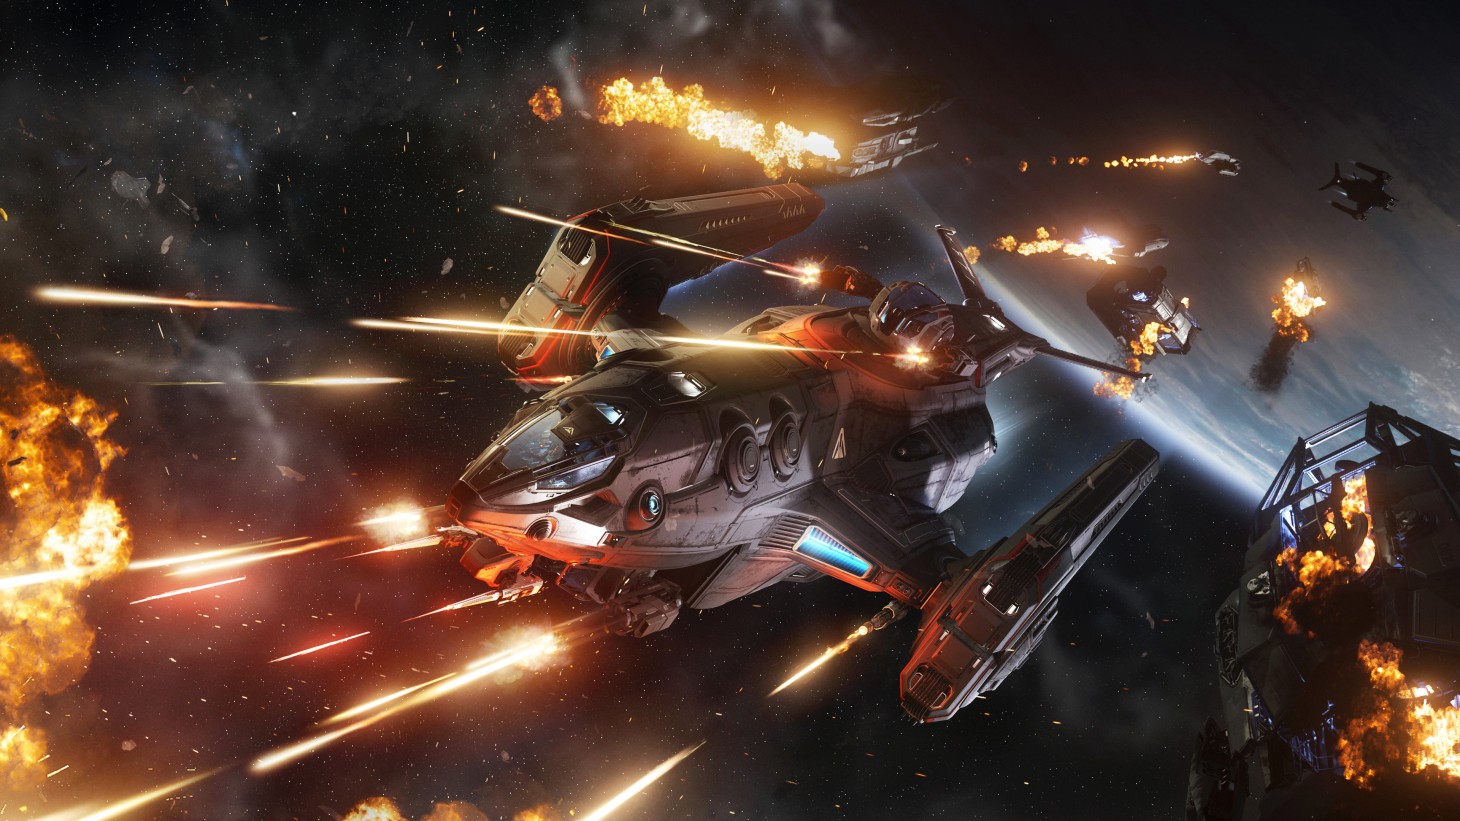 The Star Citizen Free Fly Event is now live. Play the game at no cost for